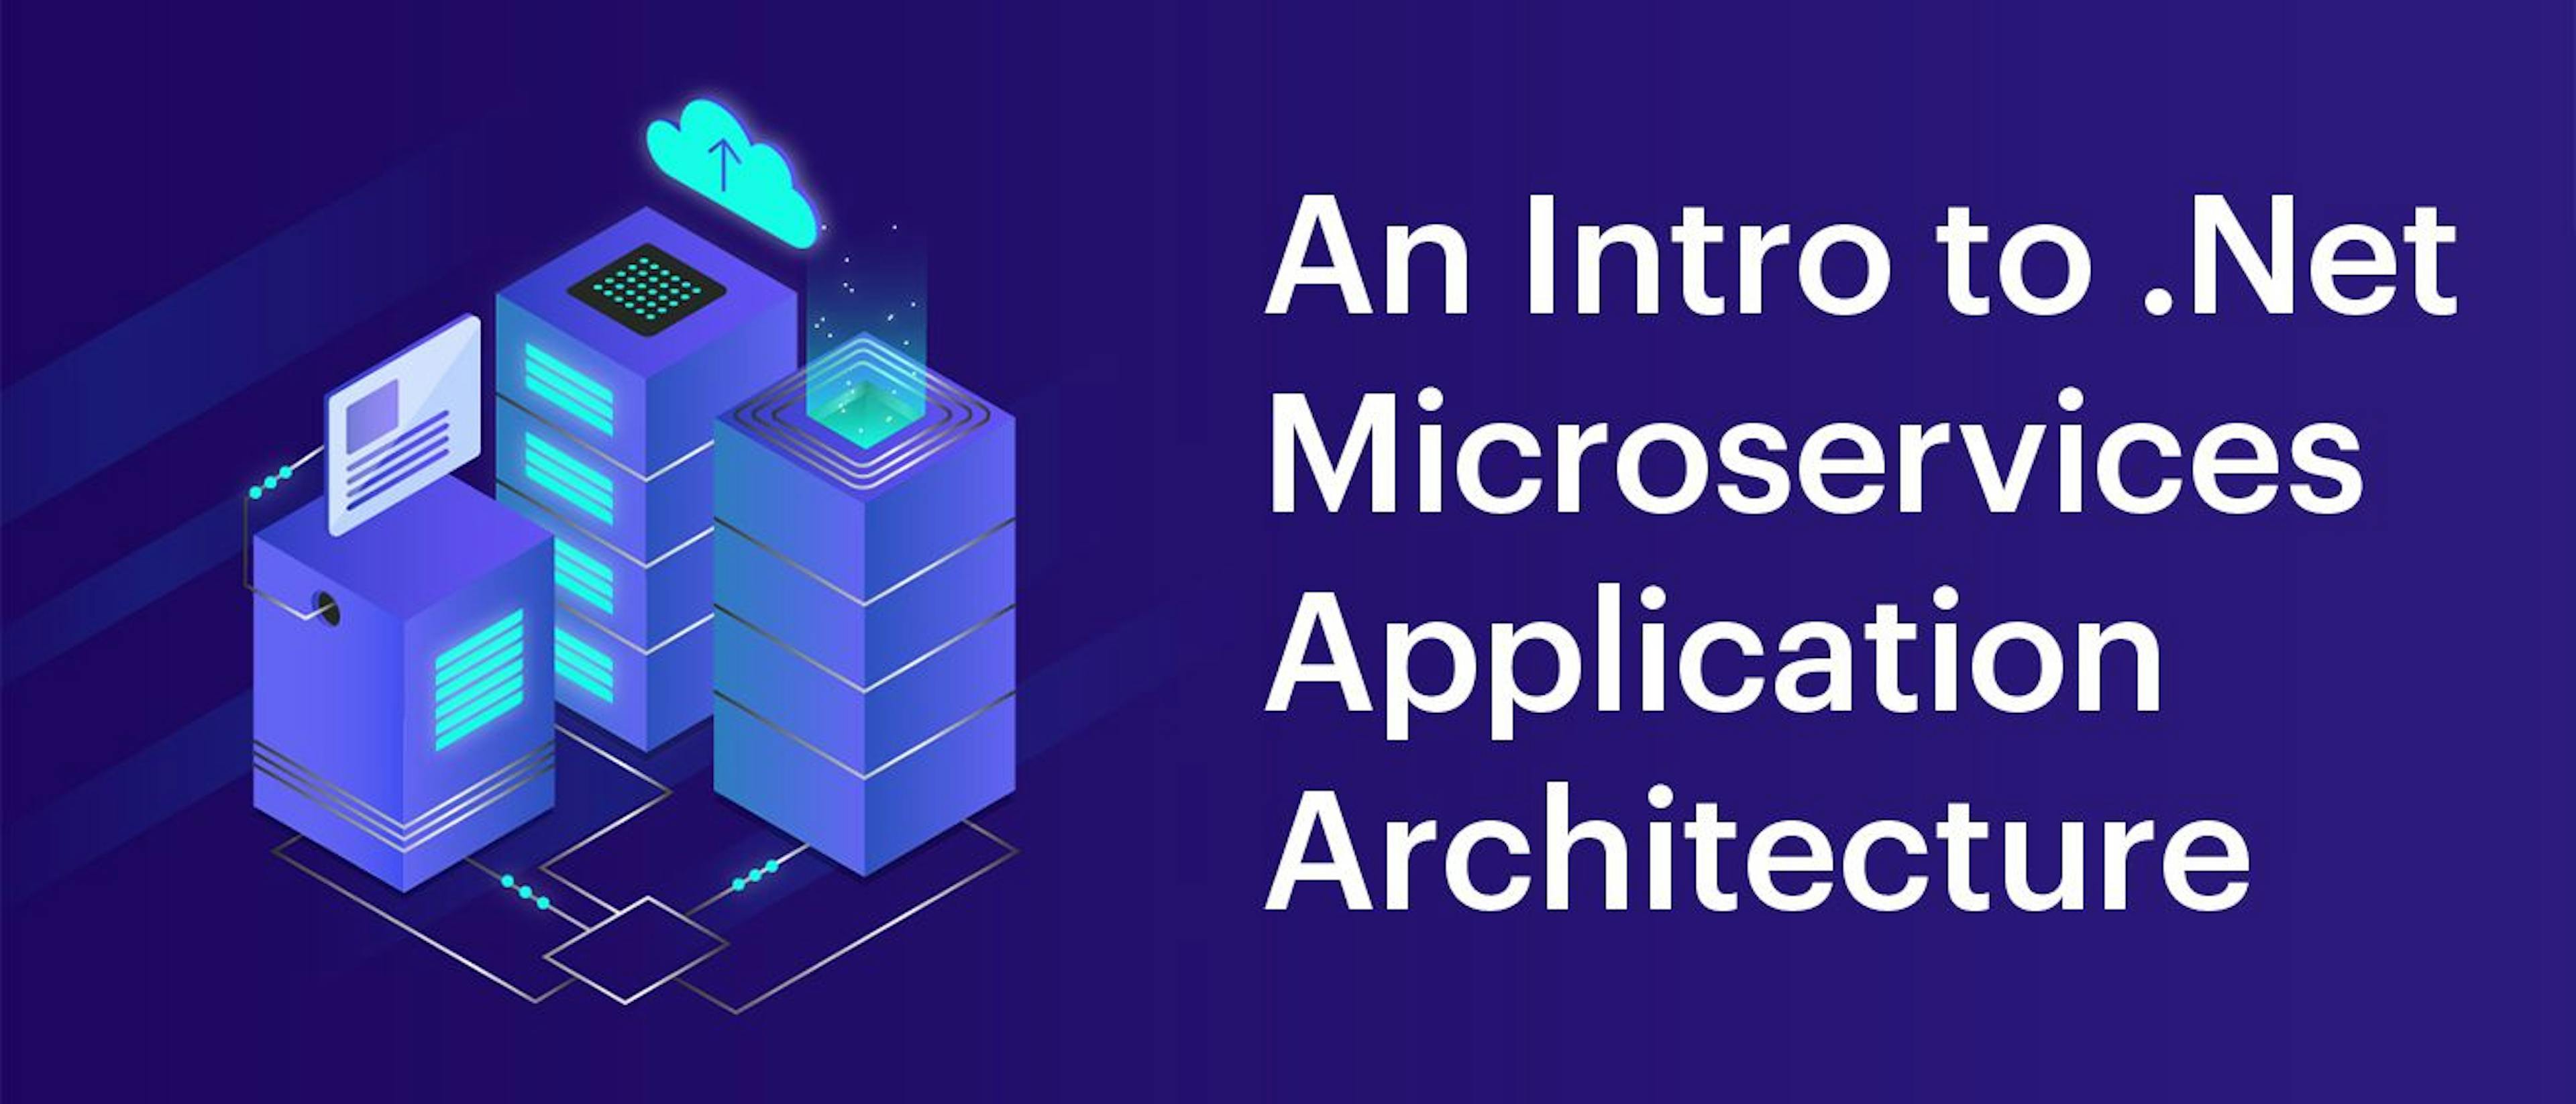 featured image - An Intro to .Net Microservices Application Architecture